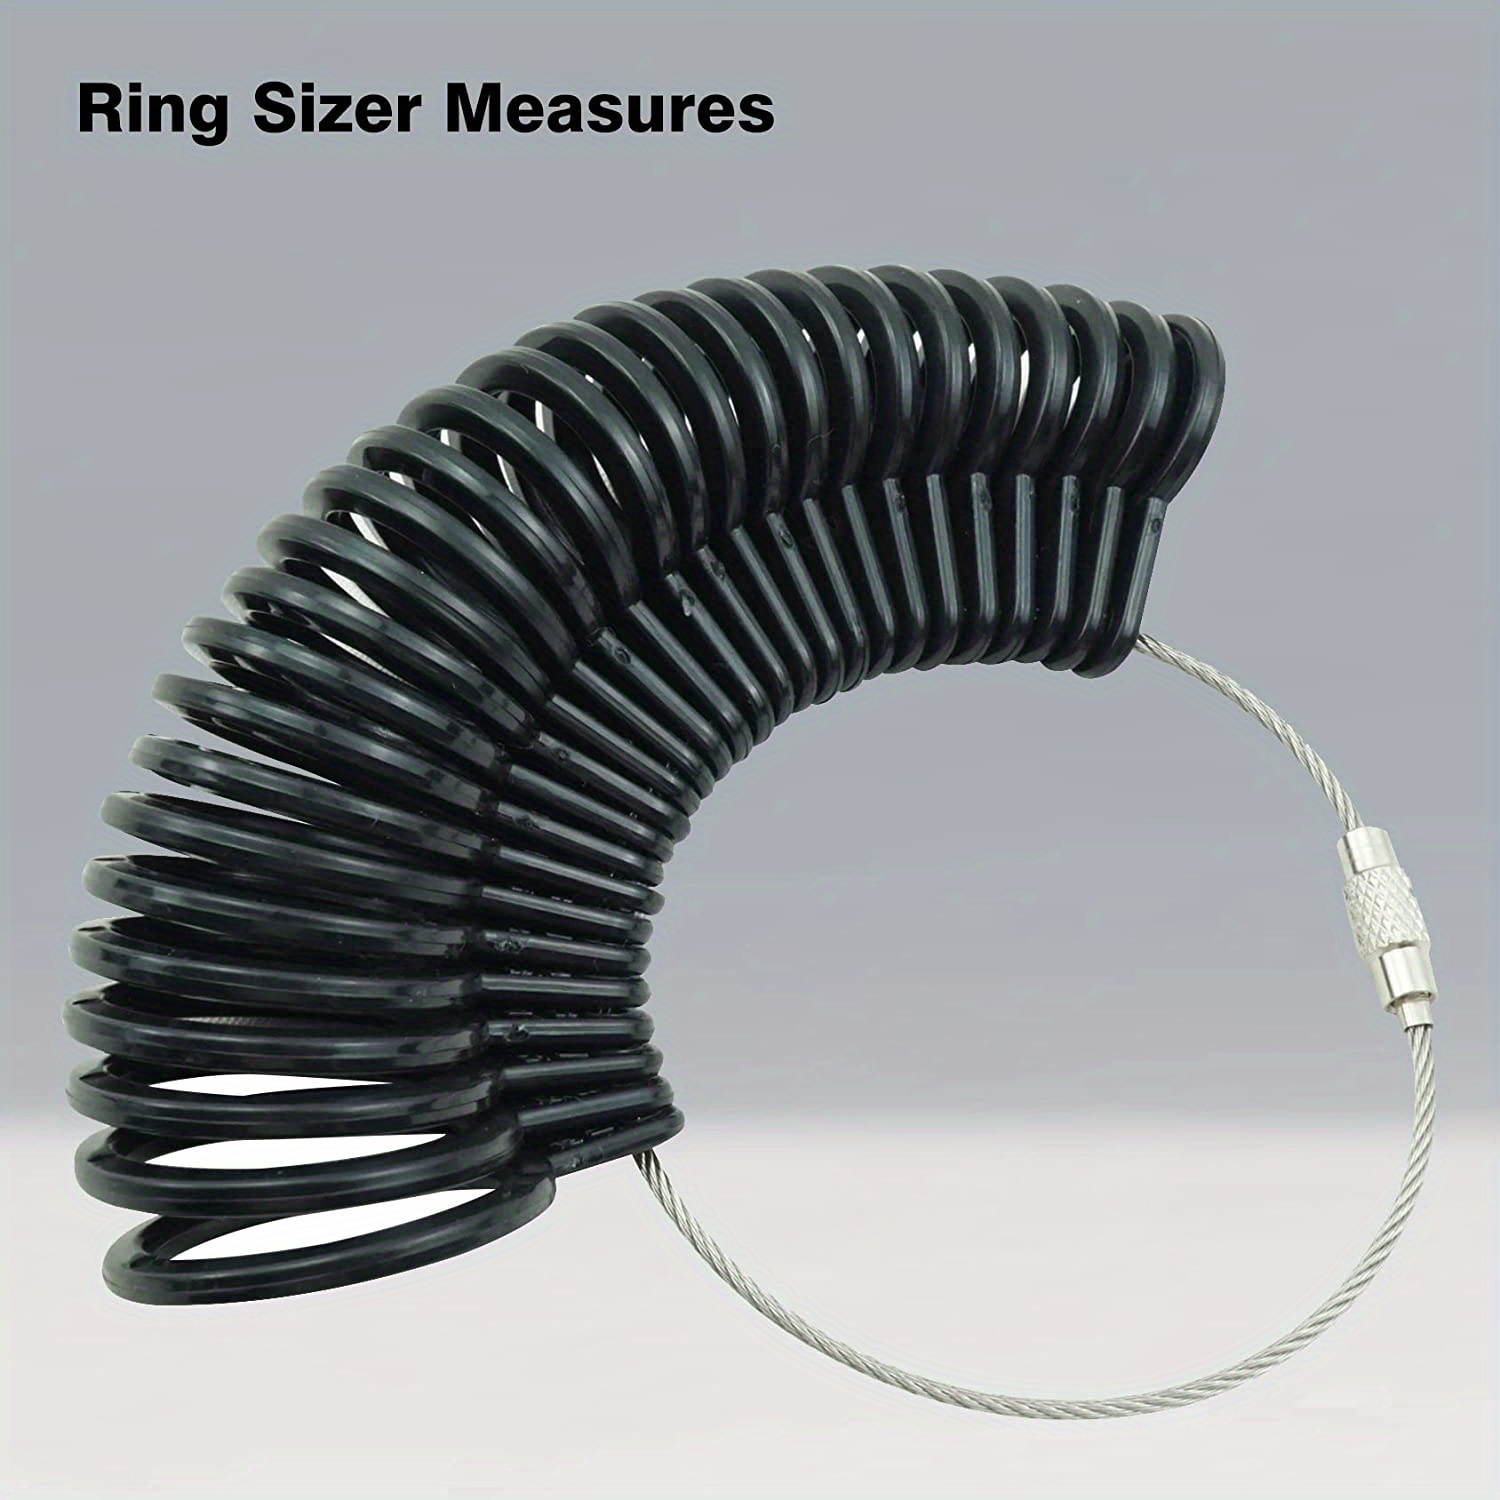  Ring Sizer Measuring Tool Ring Size Measurement Tools Ring  Sizing Kit Finger Measurer Jewelry Sizes Gauge US 1-17 Reusable 4 Pieces :  Arts, Crafts & Sewing